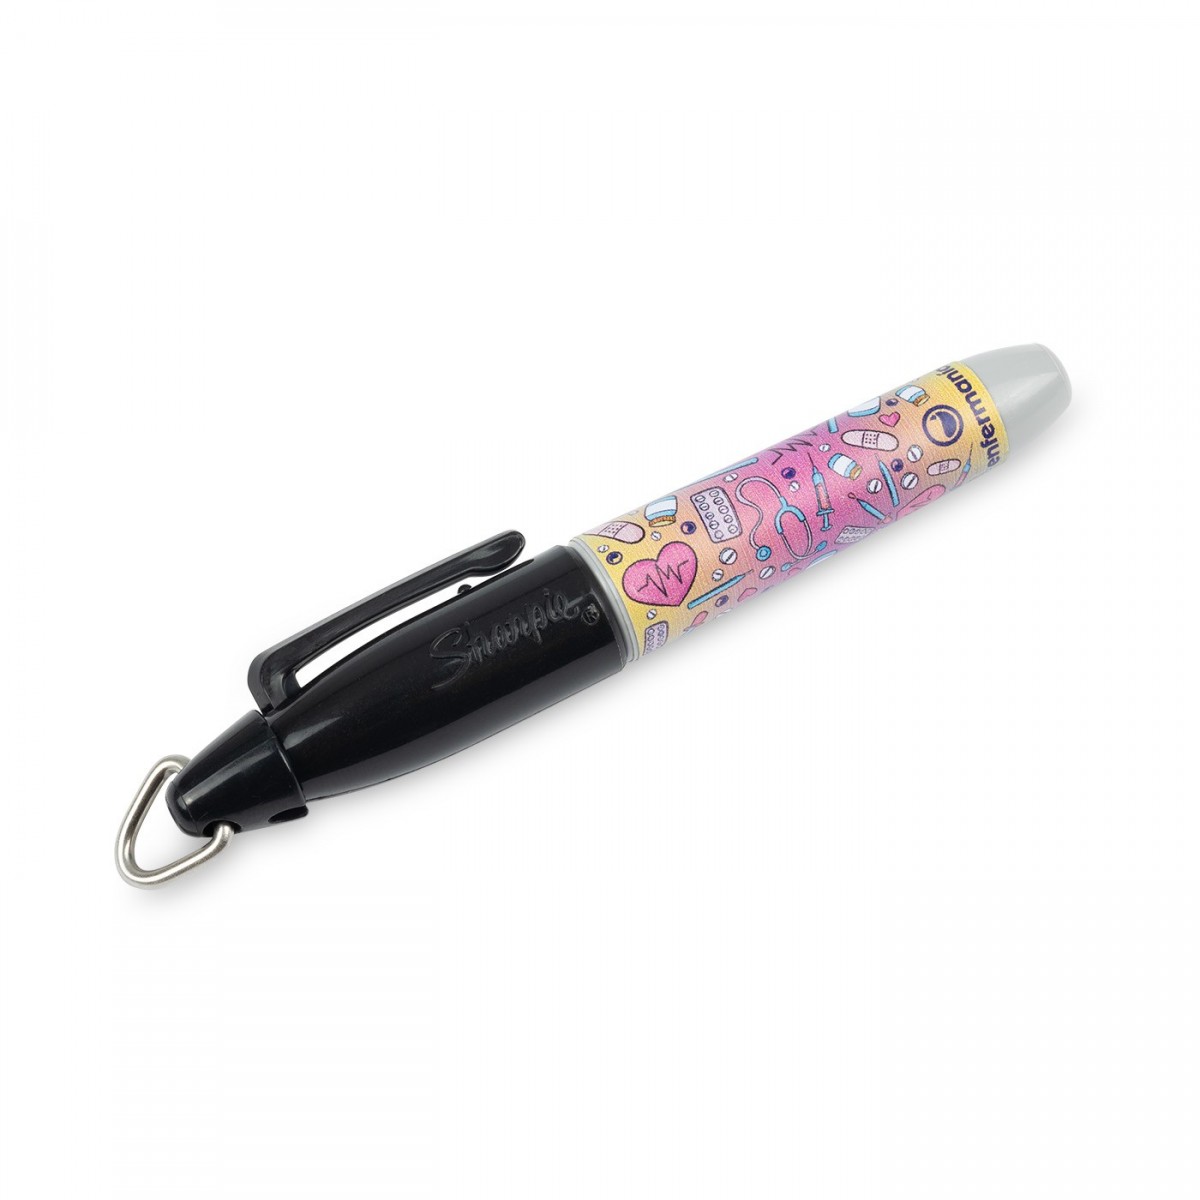 Sharpie mini permanent marker for nurses with Colorful printing